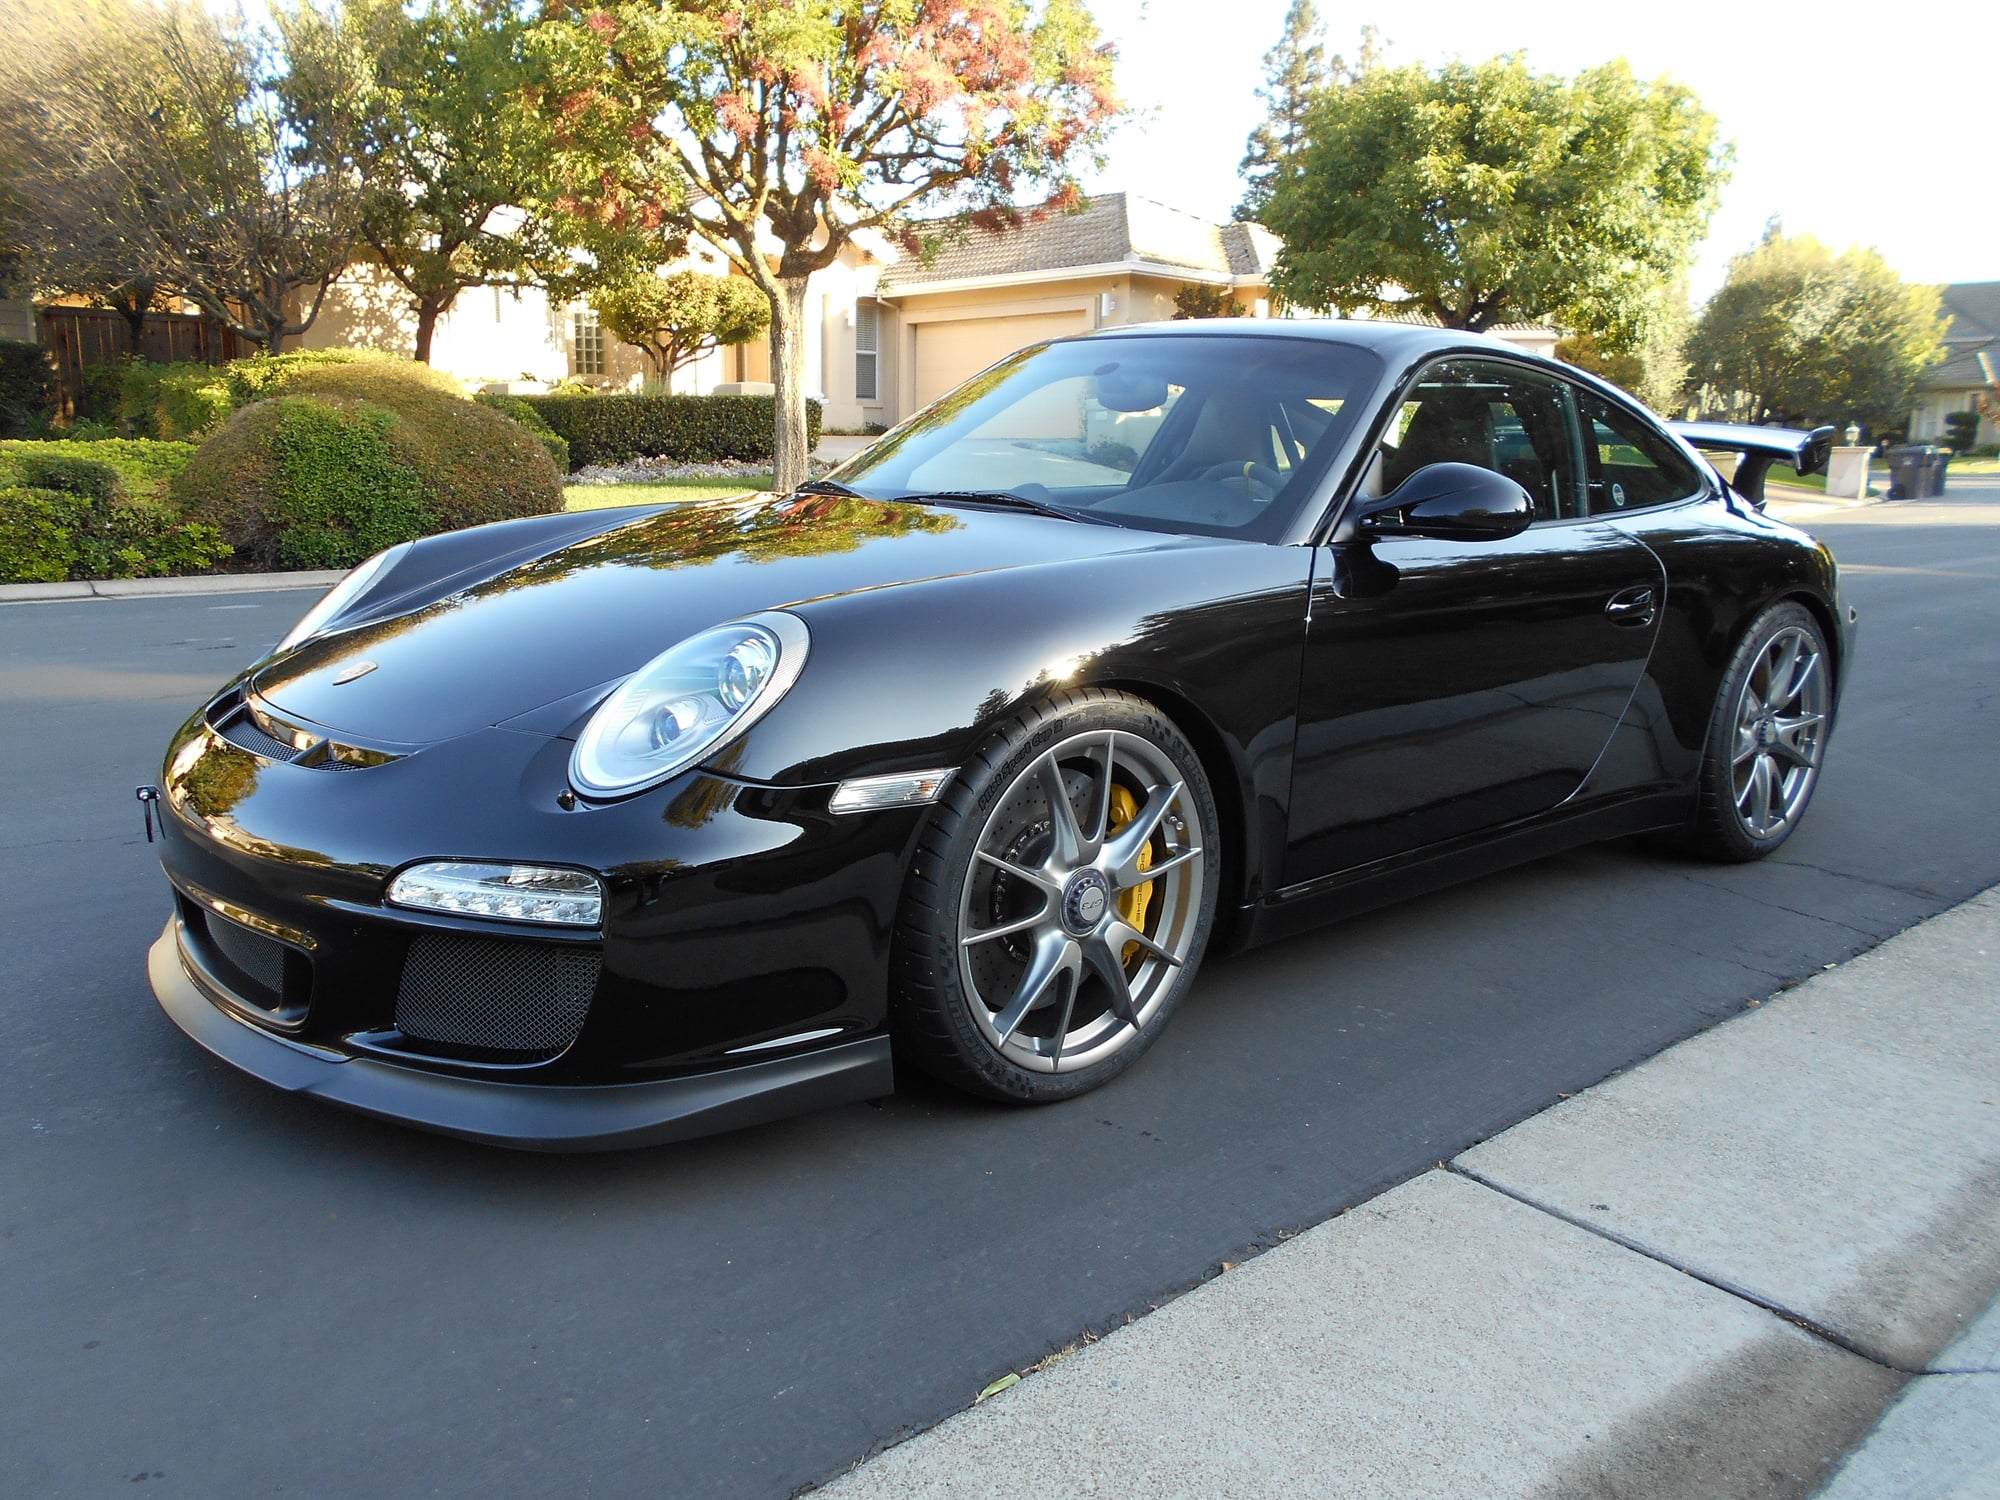 2010 Porsche GT3 - Porshe 2010 997.2 GT3 - Used - VIN WP0AC2A97AS783425 - 14,675 Miles - 6 cyl - 2WD - Manual - Coupe - Black - Stockton, CA 95205, United States